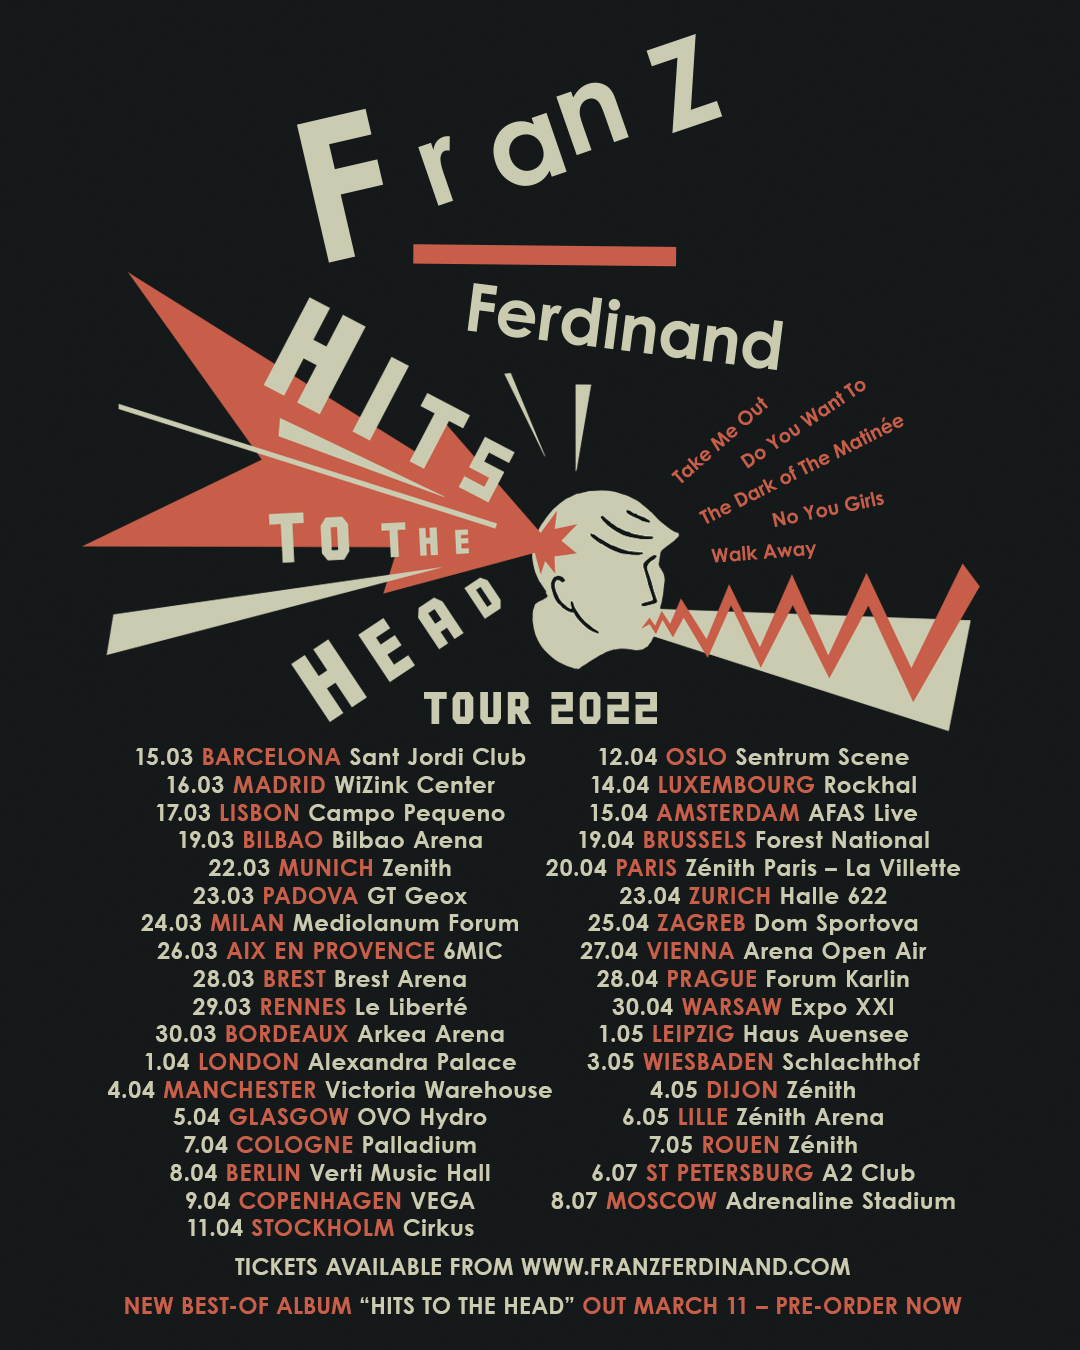 Hits To The Head Greatest Hits tour! 🌎 Franz Ferdinand